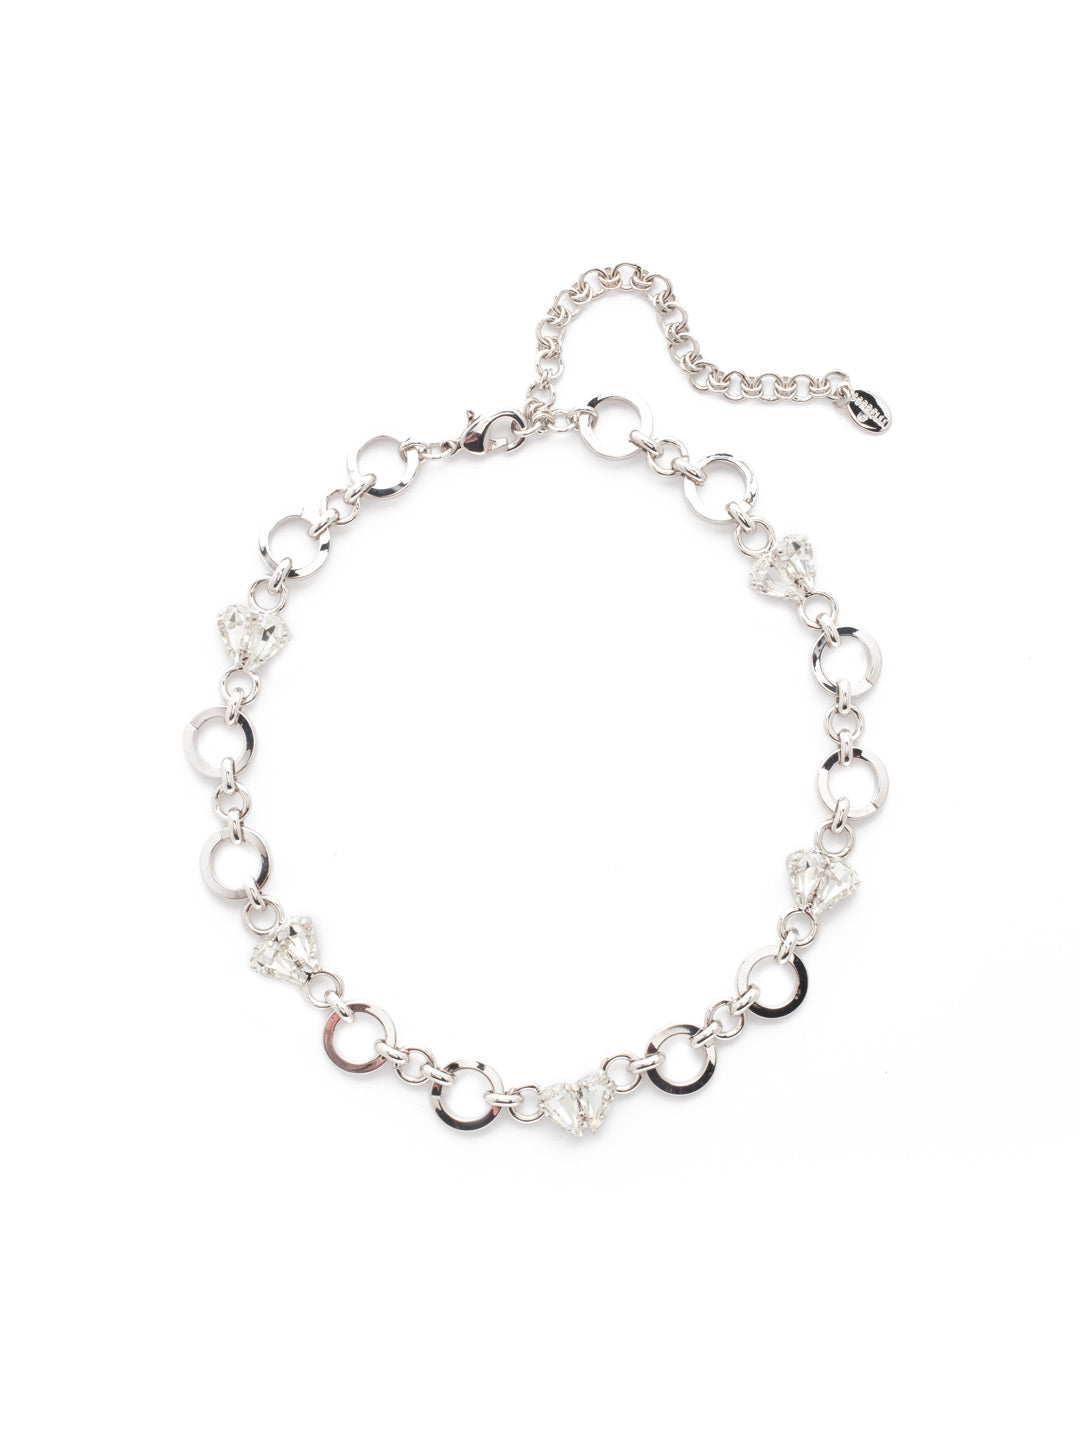 Marlowe Choker Necklace - NER4PDCRY - <p>Links and hearts. They just go together. Get the look and send a message of unity in our Marlowe Choker Necklace featuring sparkling pear crystals. From Sorrelli's Crystal collection in our Palladium finish.</p>